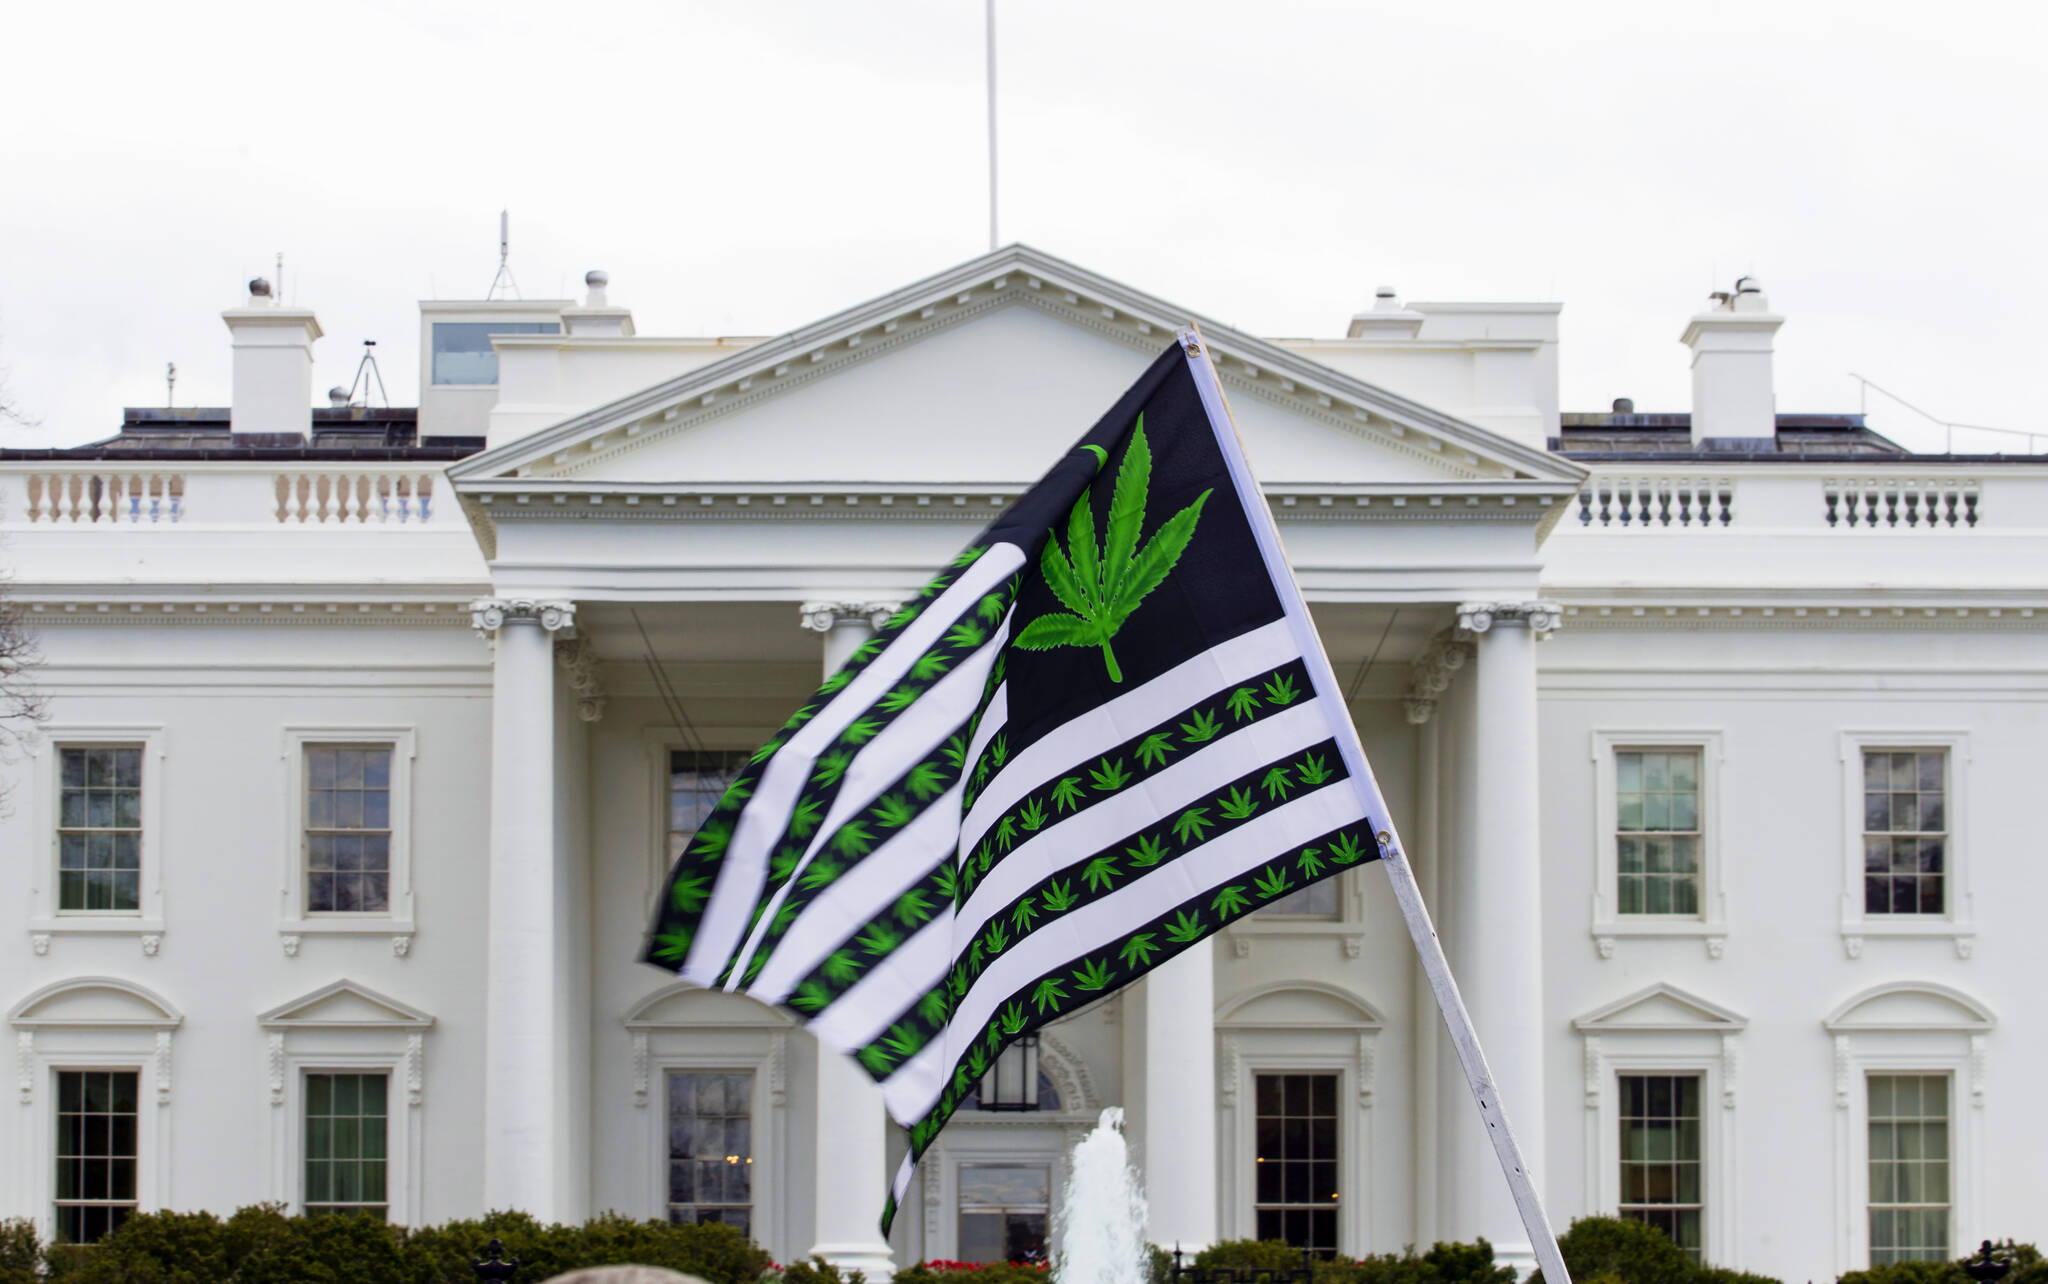 A demonstrator waves a flag with marijuana leaves depicted on it during a protest calling for the legalization of marijuana, outside of the White House on April 2, 2016, in Washington. President Joe Biden is pardoning thousands of Americans convicted of “simple possession” of marijuana under federal law, as his administration takes a dramatic step toward decriminalizing the drug and addressing charging practices that disproportionately impact people of color. (AP Photo / Jose Luis Magana)